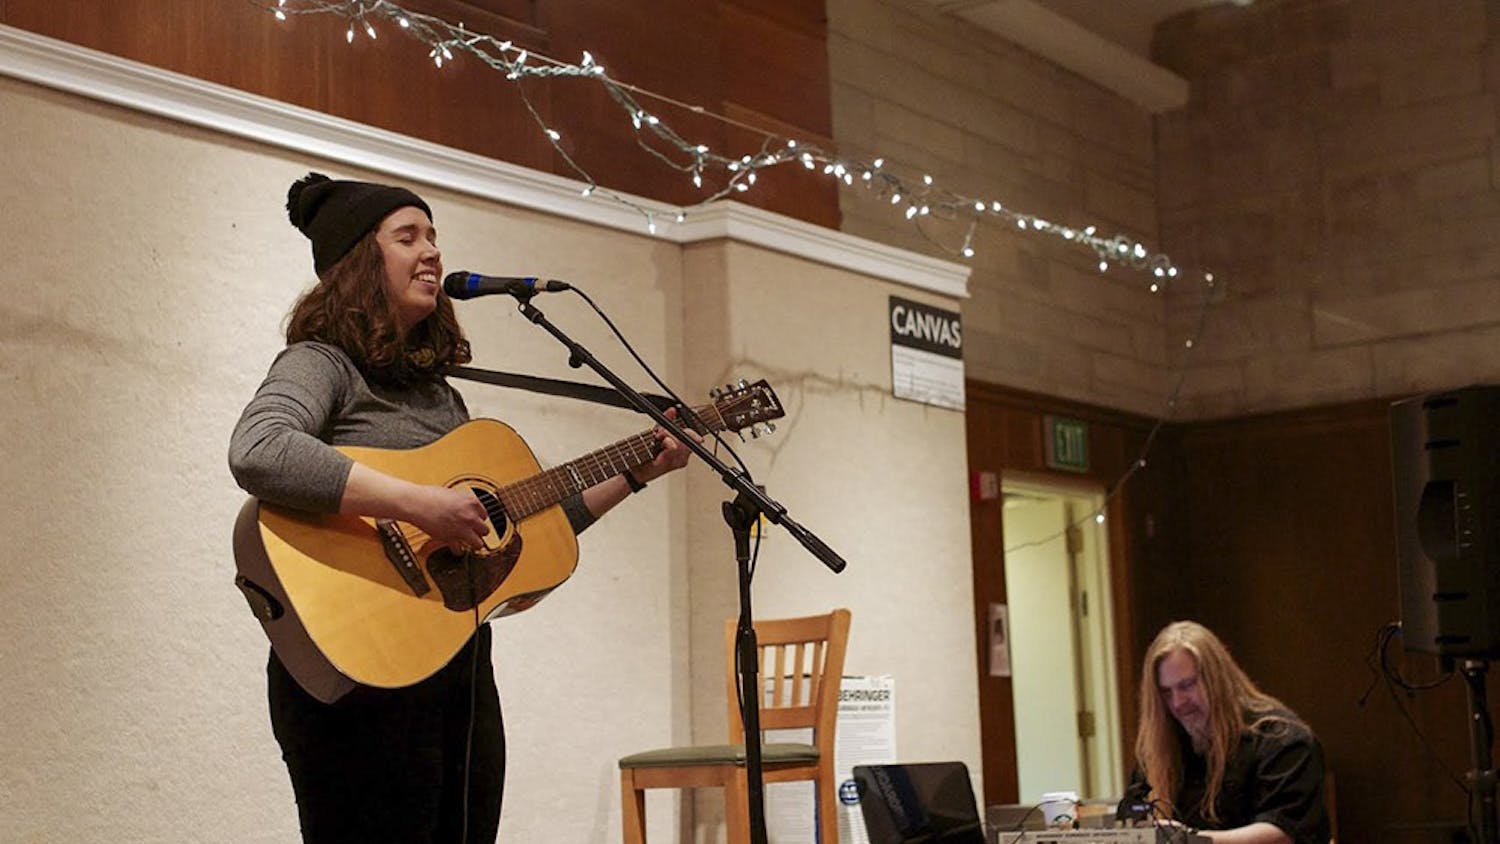 Biz Strother performs at Live From Bloomington Presents on Wednesday evening. Local musicians took part in the event that was held at the Indiana Memorial Union Starbucks.